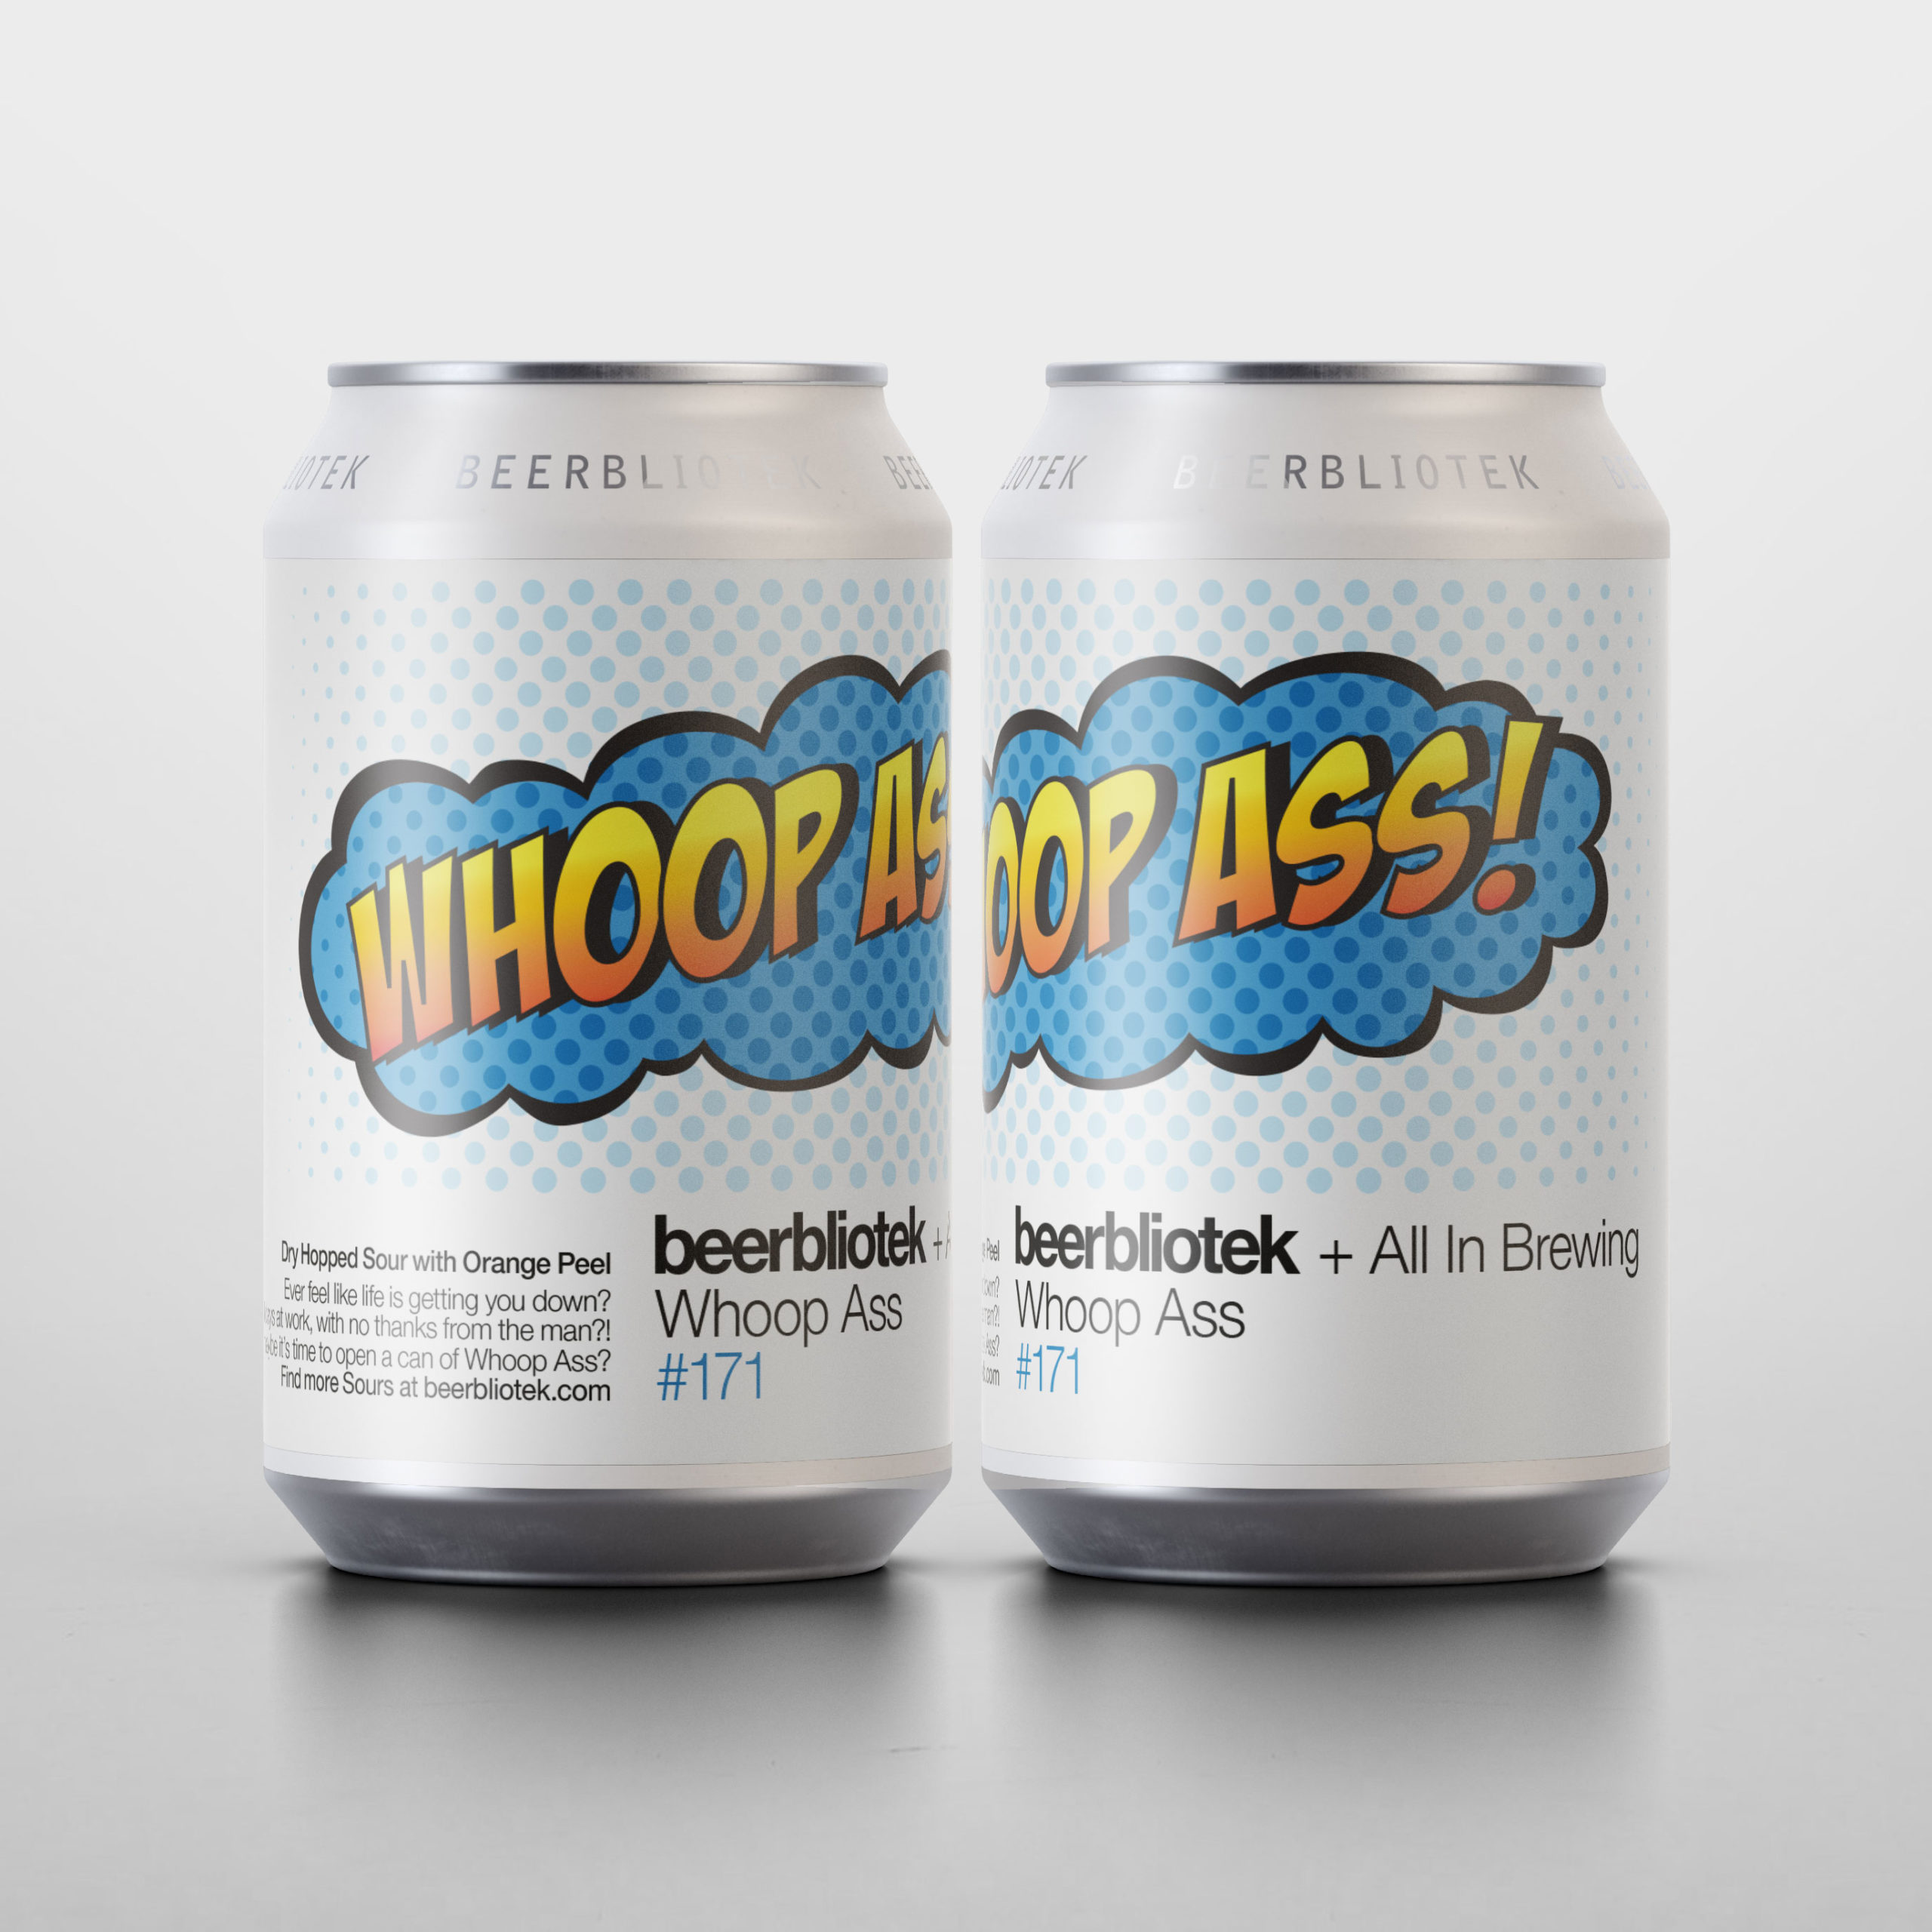 Two cans of Whoop Ass, the Berliner Weisse brewed by Beerbliotek and All In Brewing.